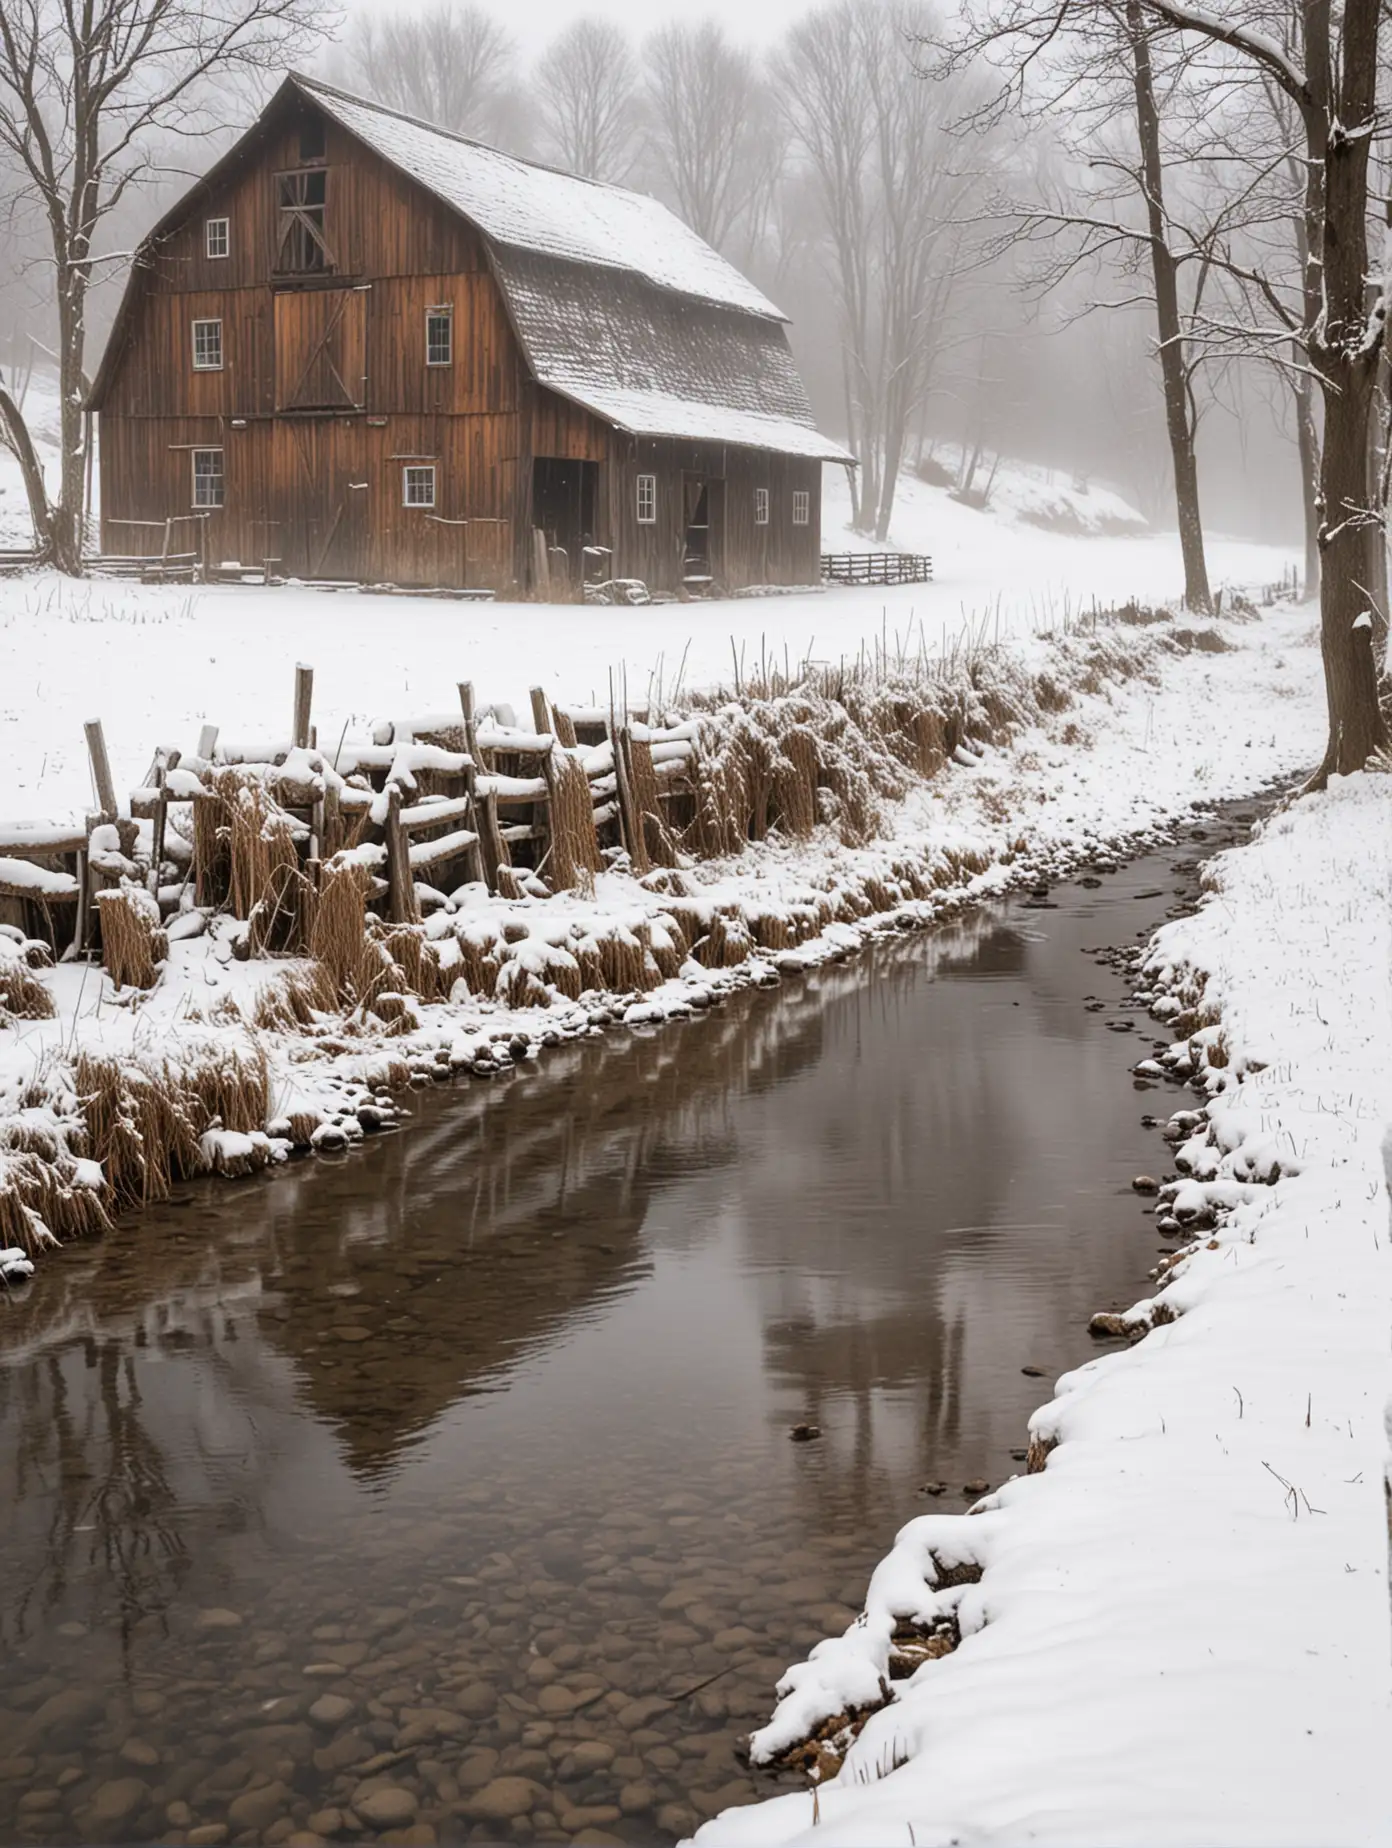 rustic wooden barn along a stream on a snowy foggy morning, deer in the water

